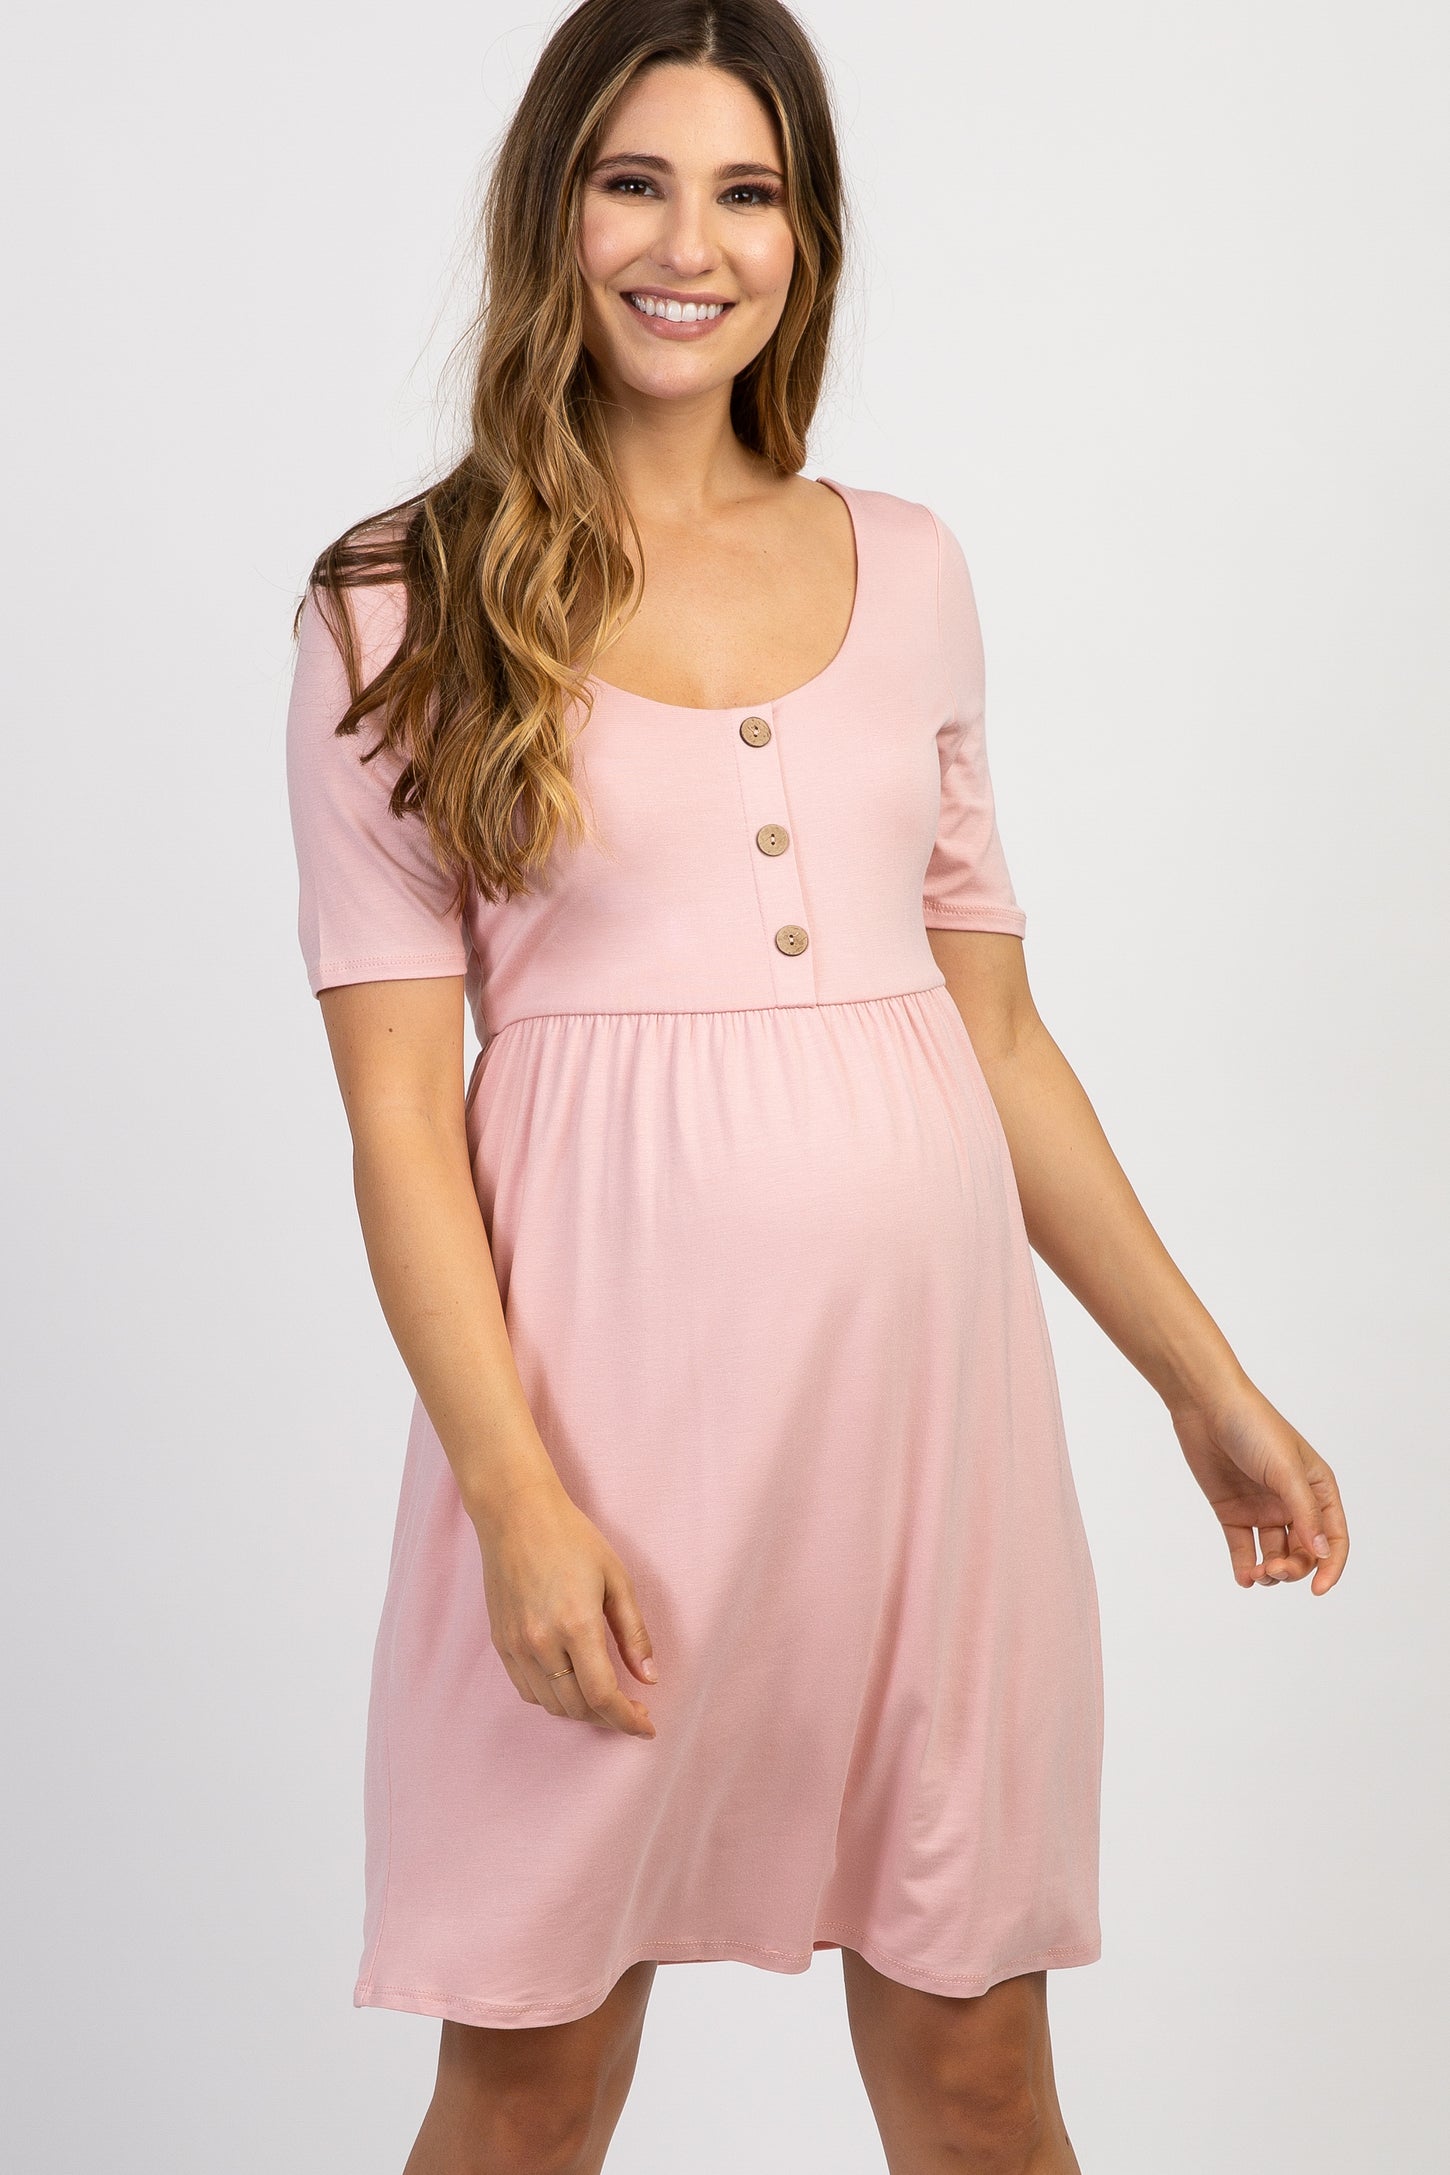 PinkBlush Pink Solid Button Front Maternity Dress